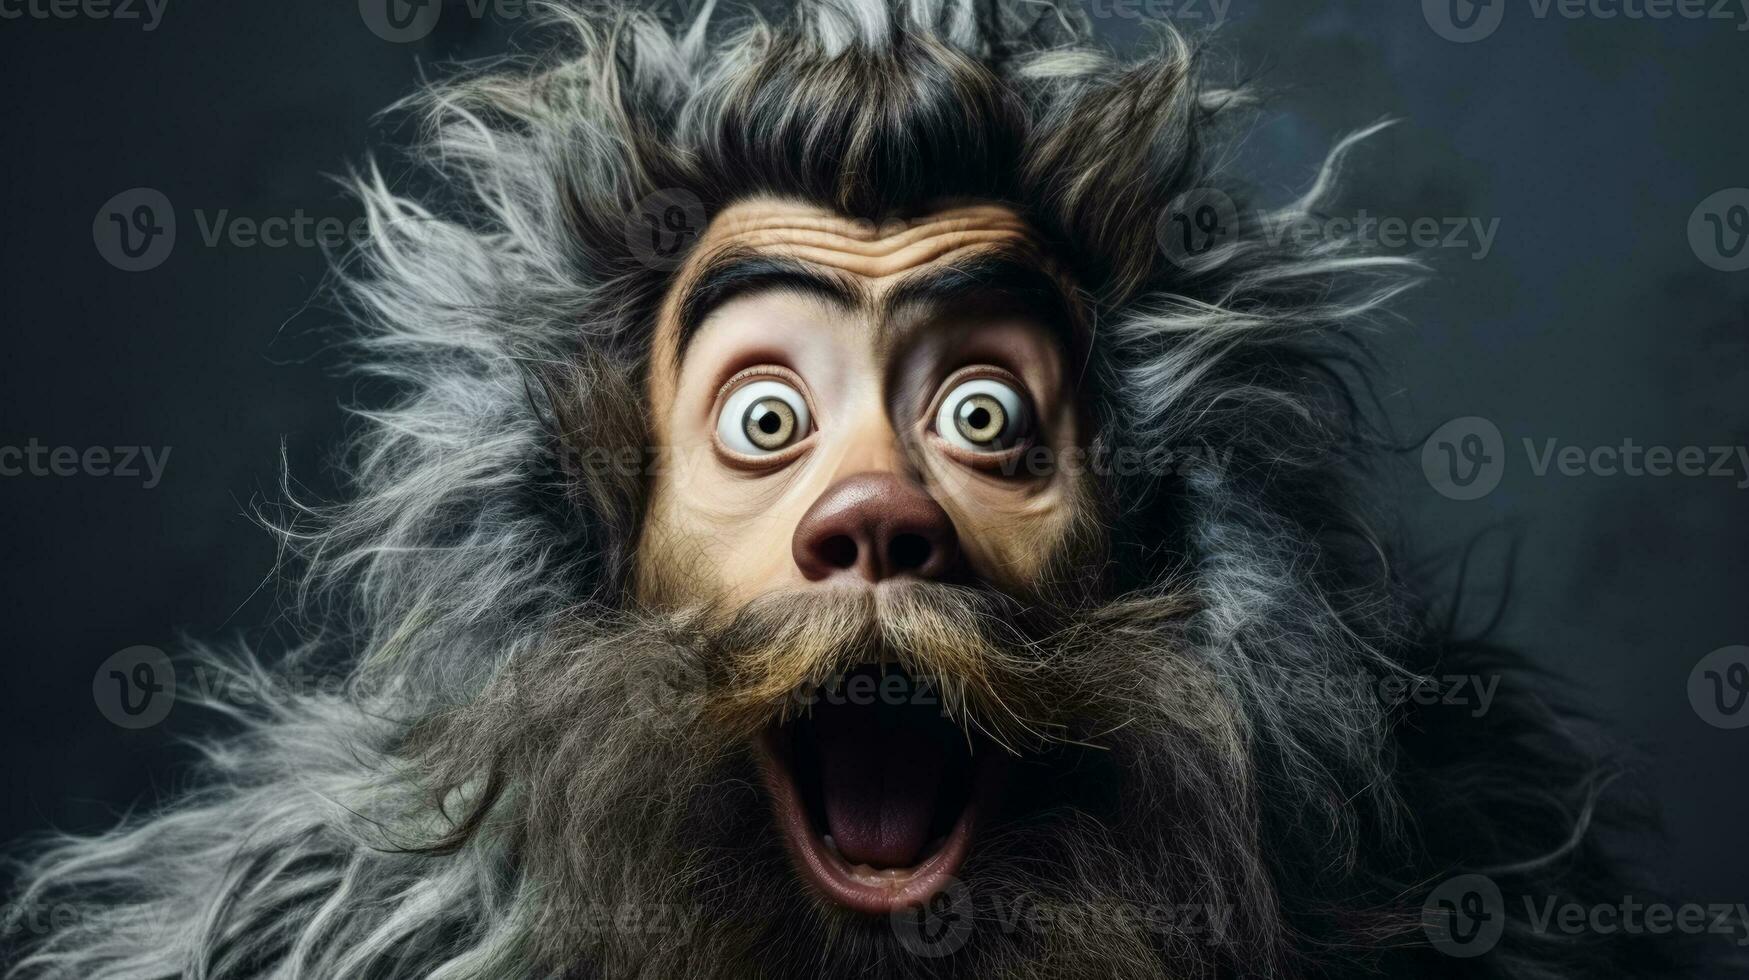 Turning into an animal or creature half man shocked face on dark background with a place for text photo